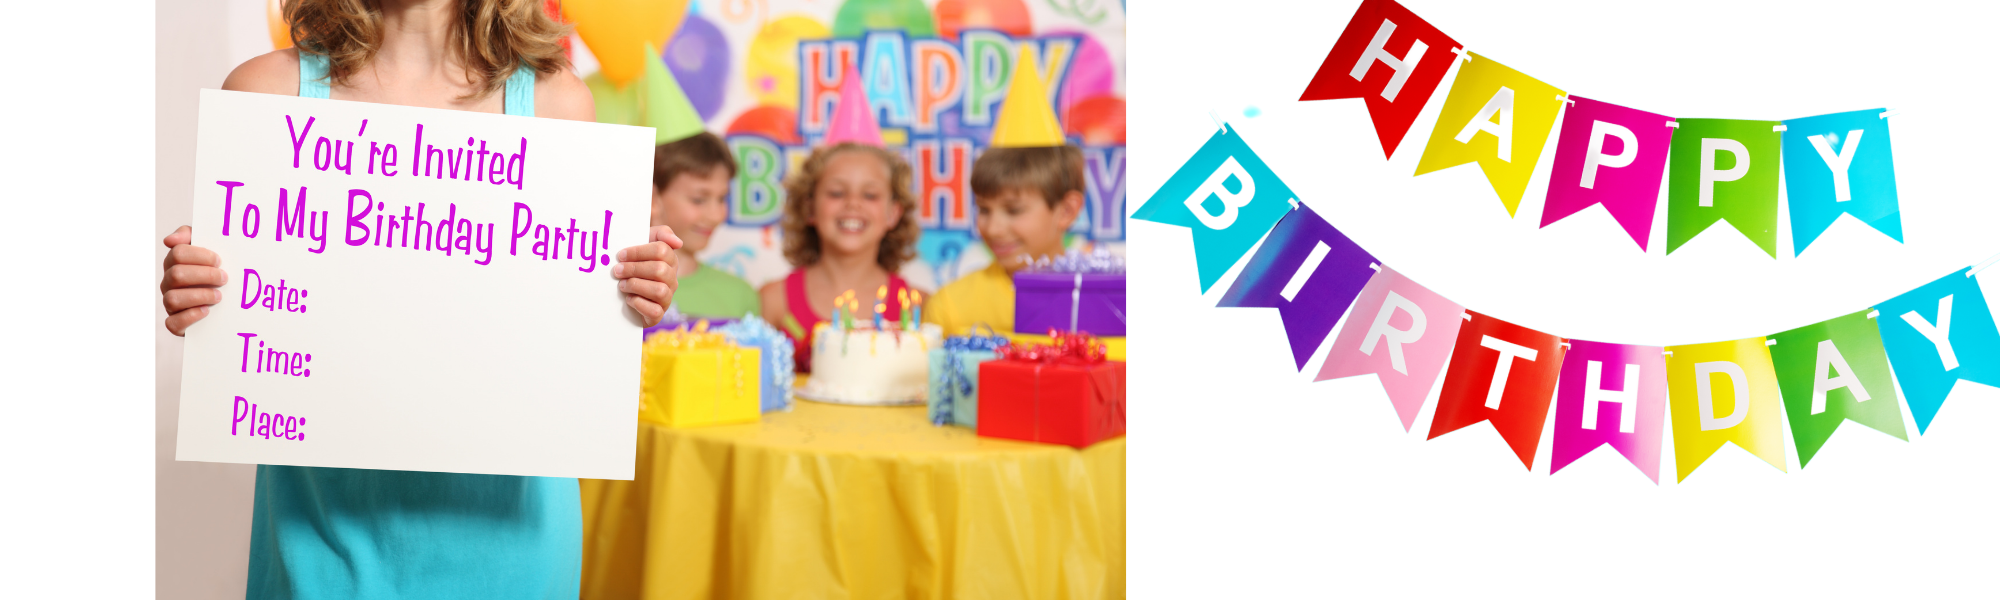 birthday banner and party invitation collage 